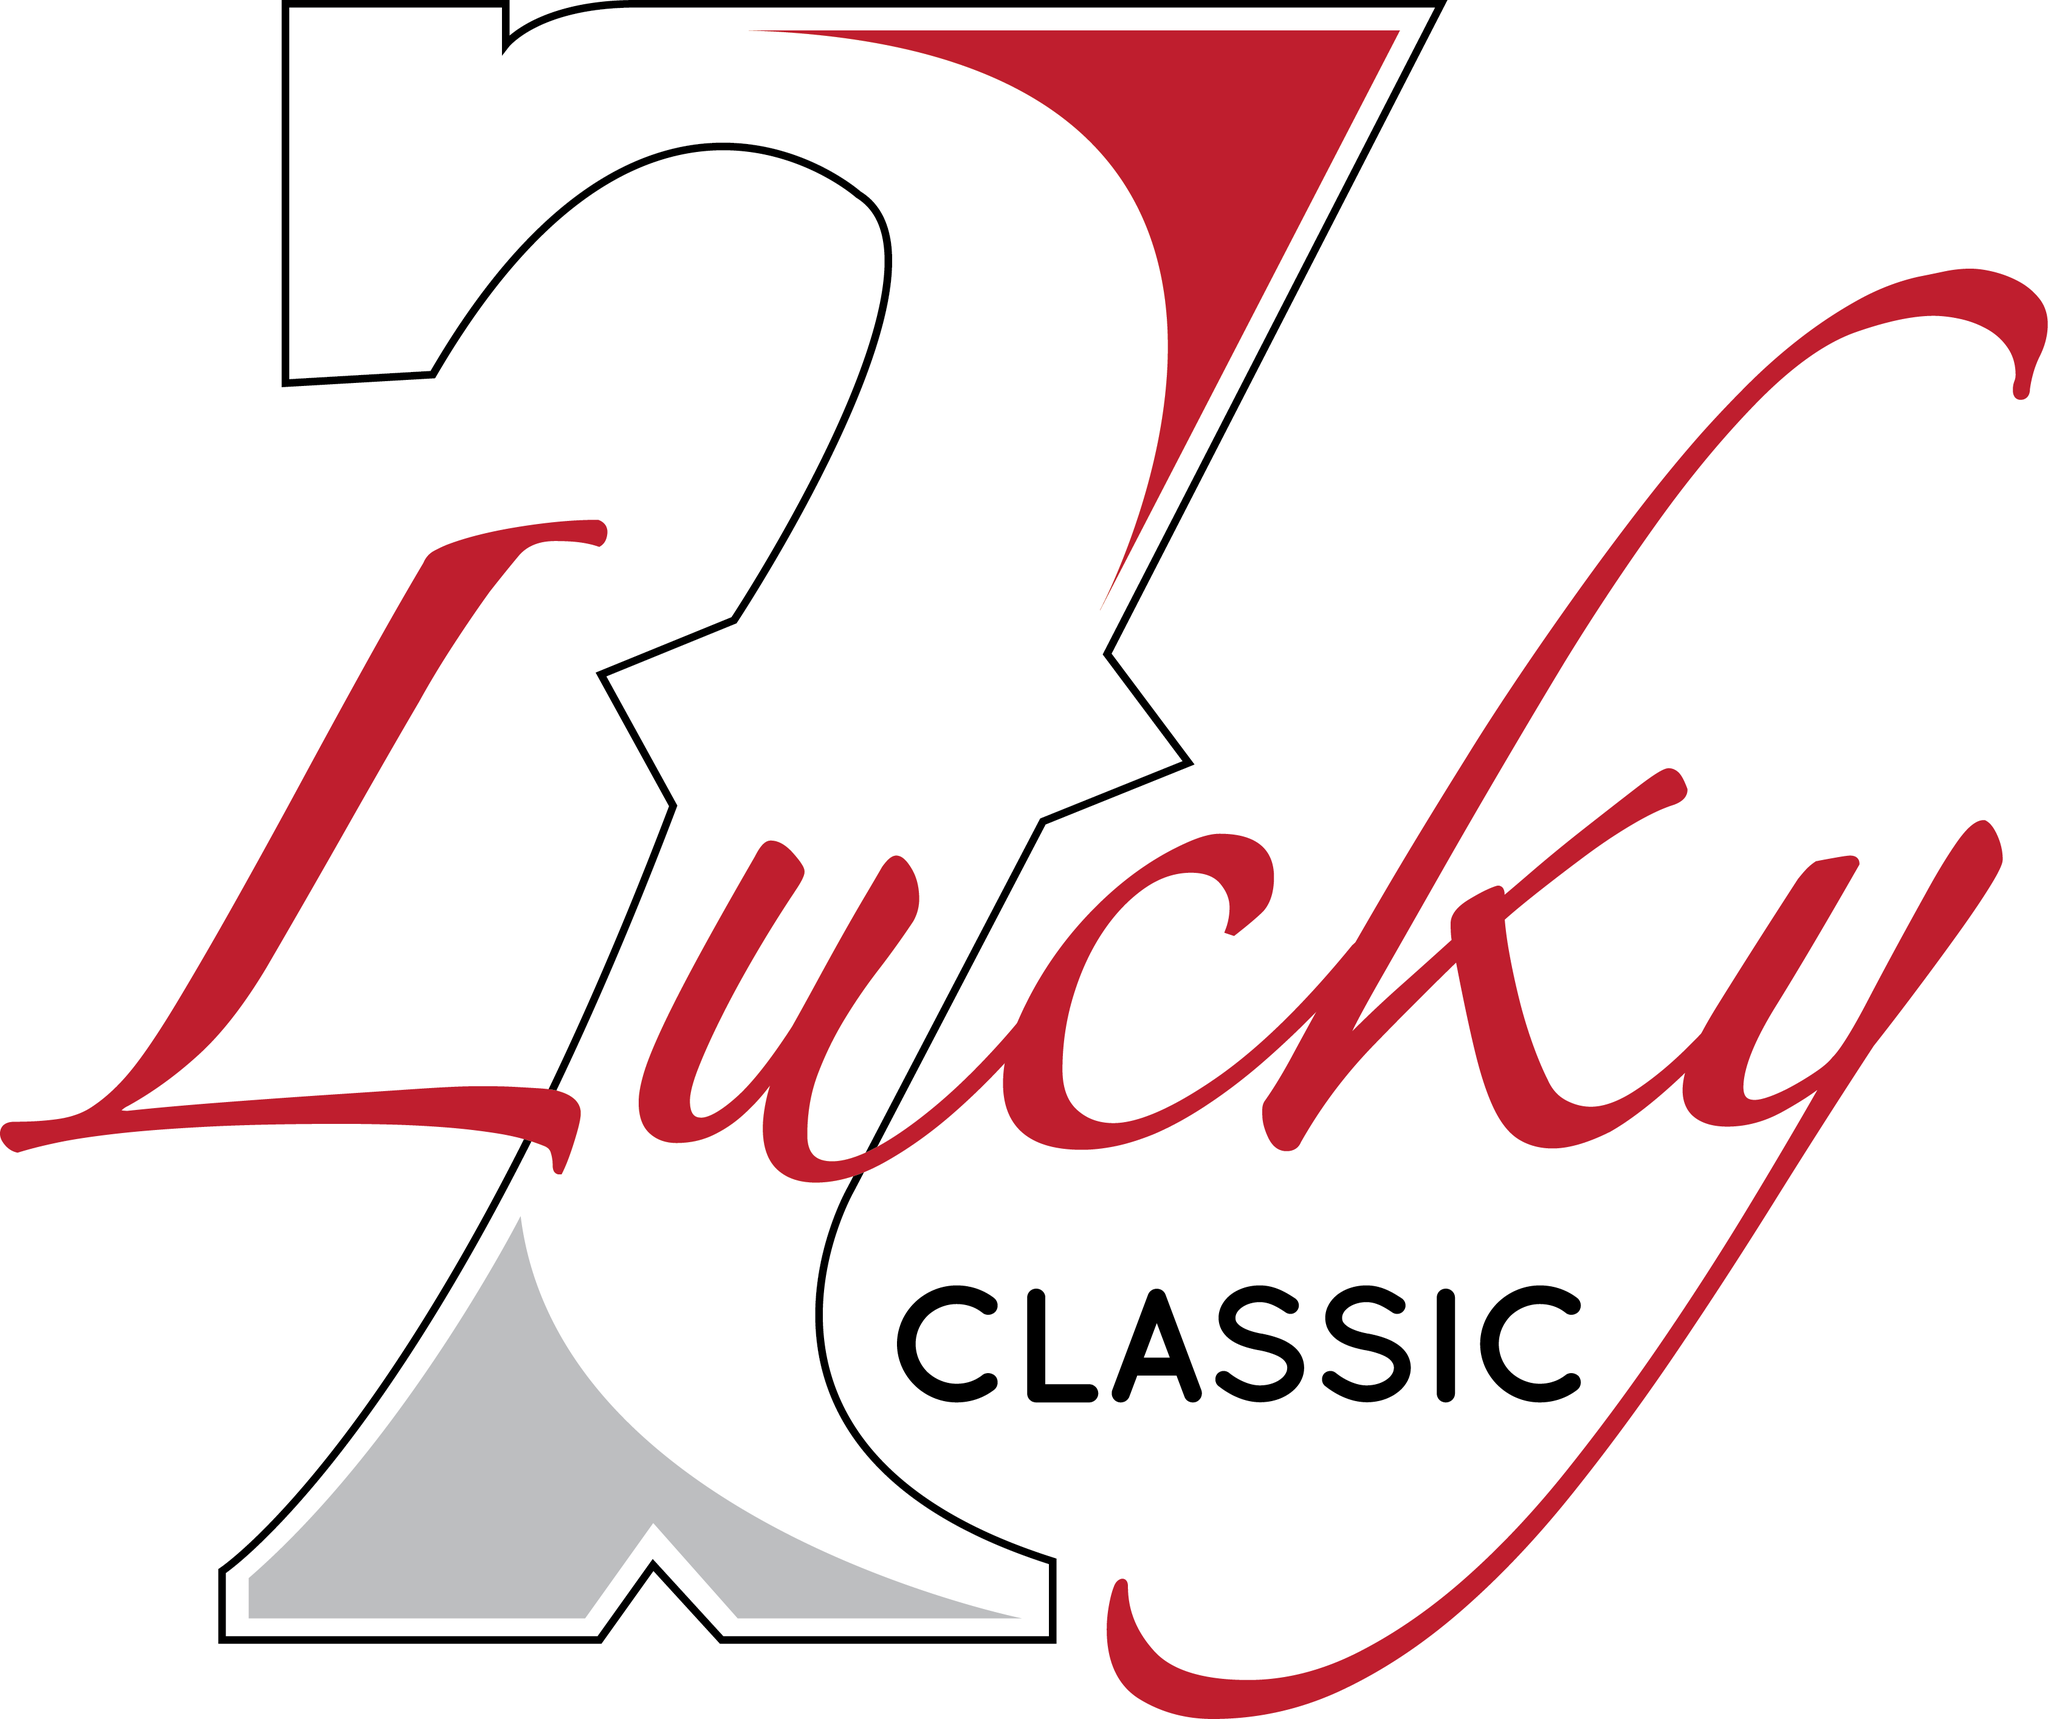 Industry Comes Together for the Lucky 7 Classic in Time of Tragedy